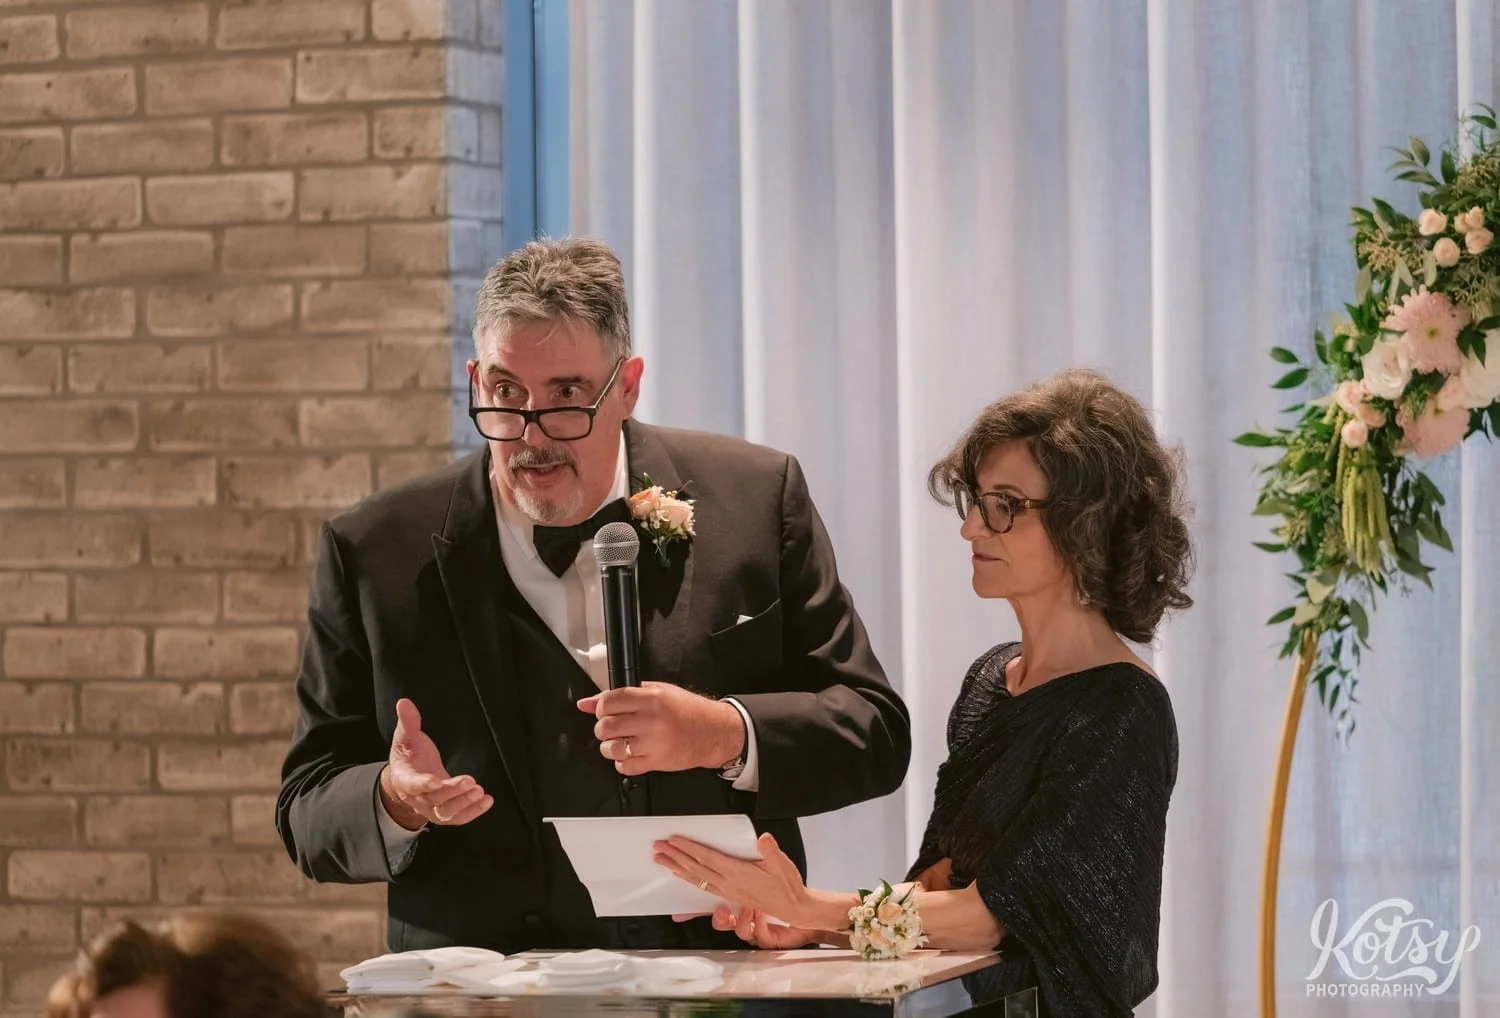 An elderly man makes a speech while standing next to his wife during a Village Loft wedding reception in Toronto, Canada